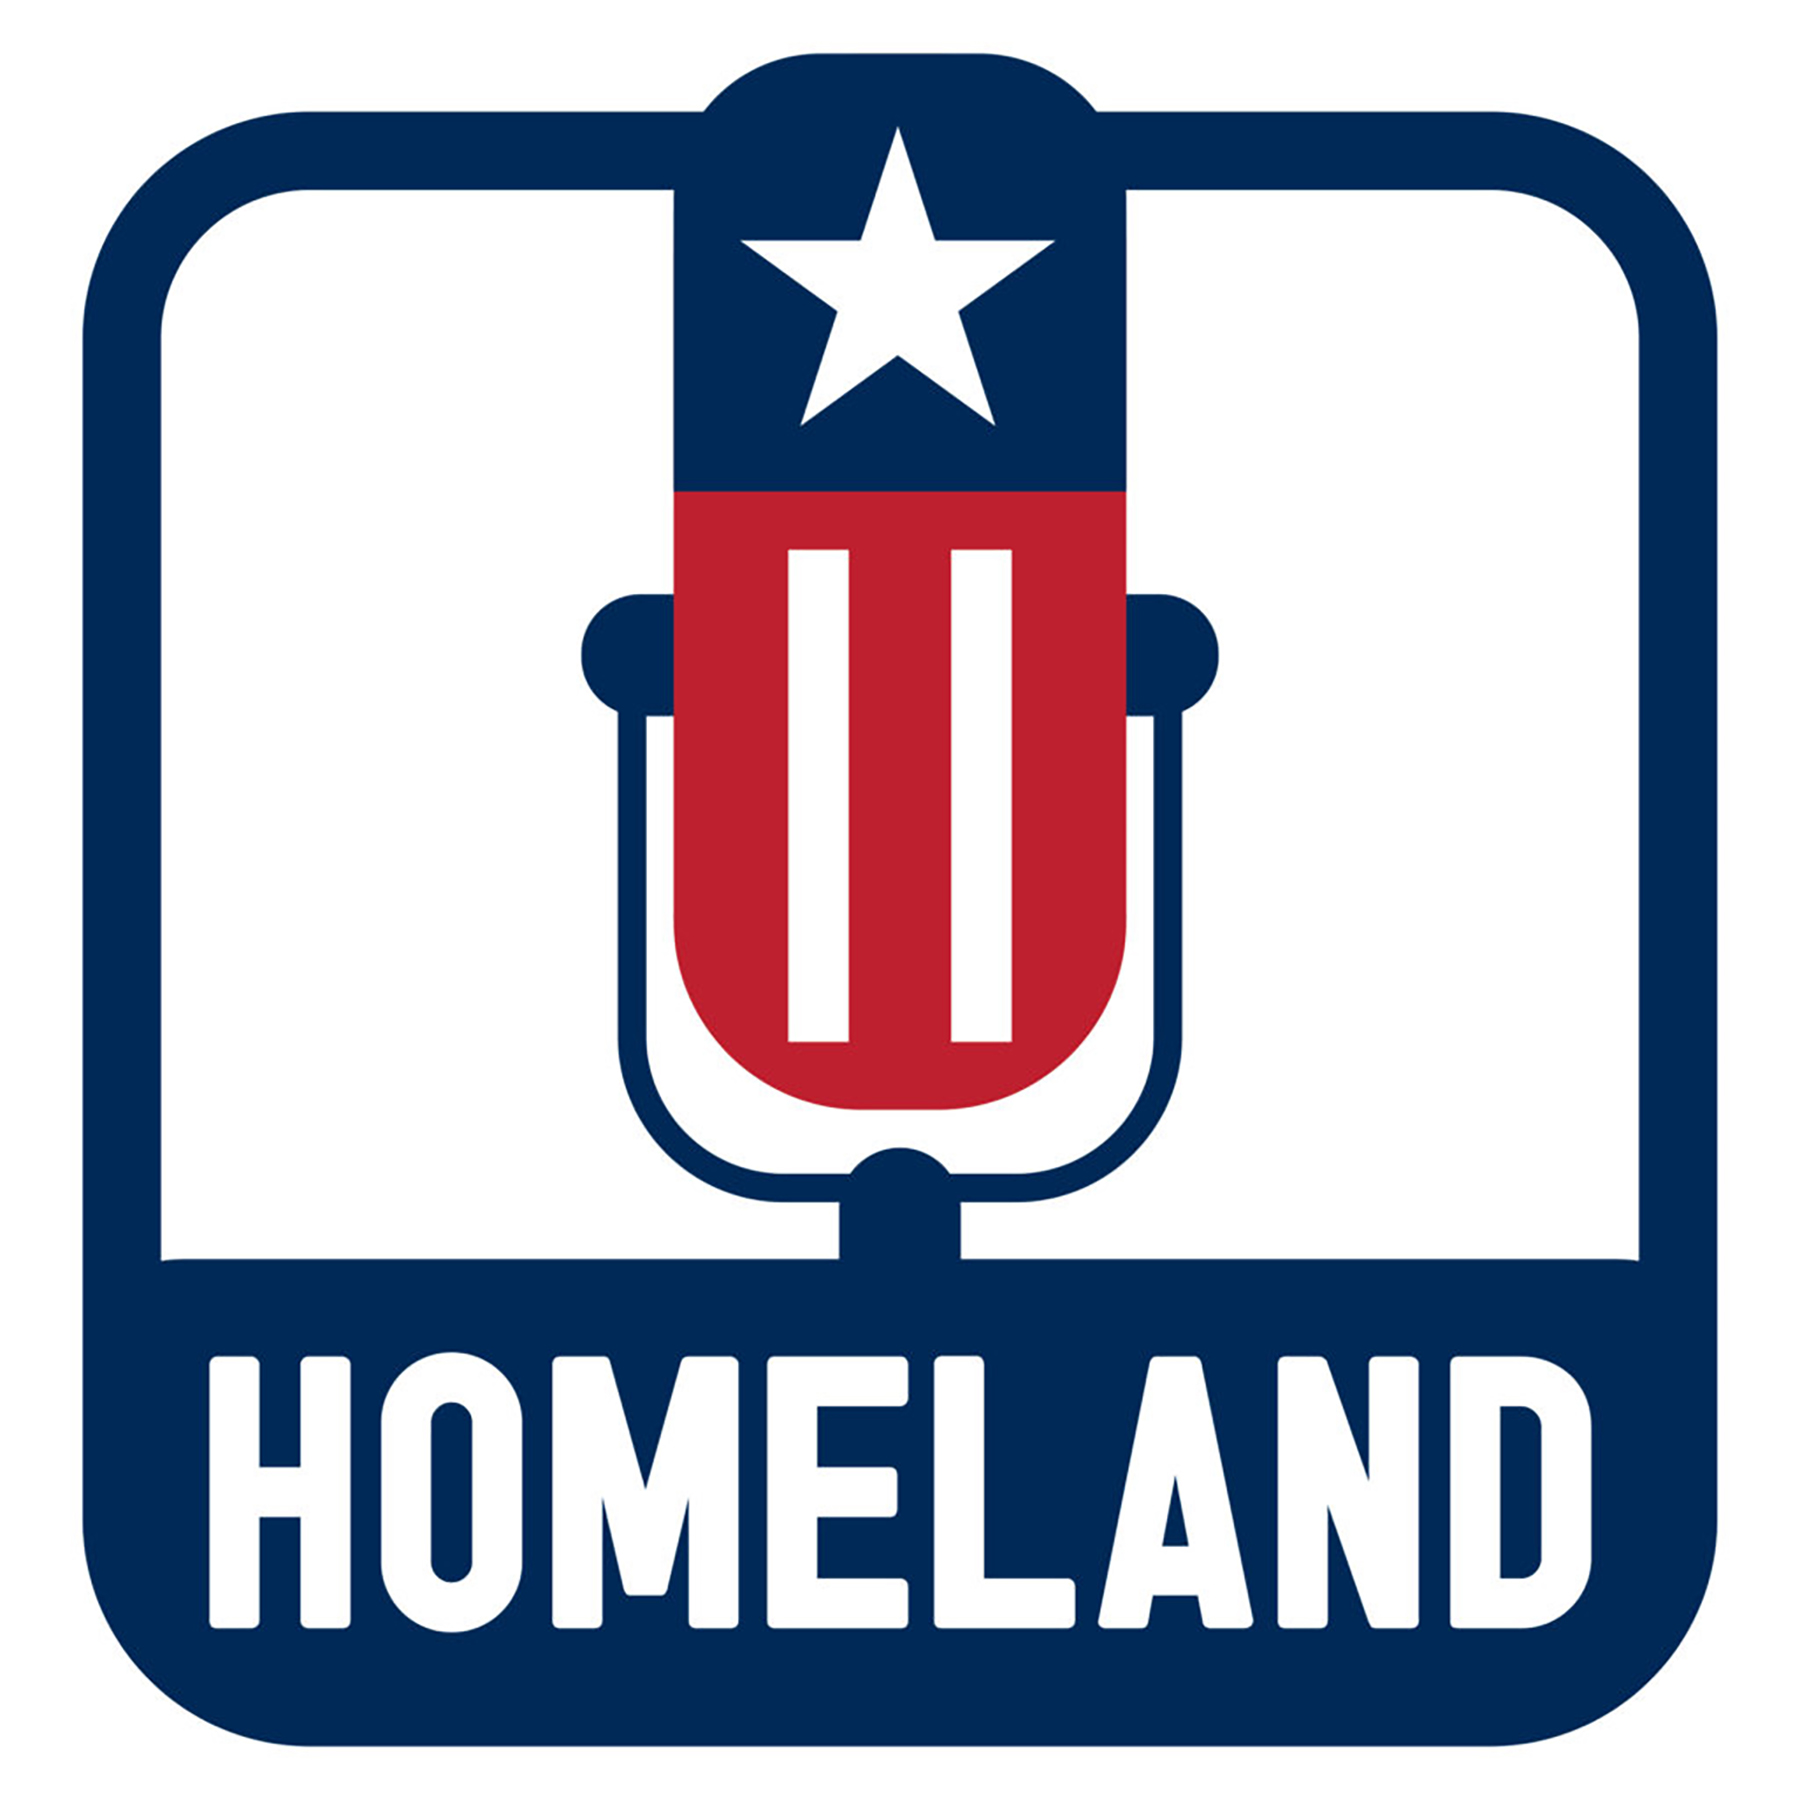 Introducing “Homeland: The Podcast”